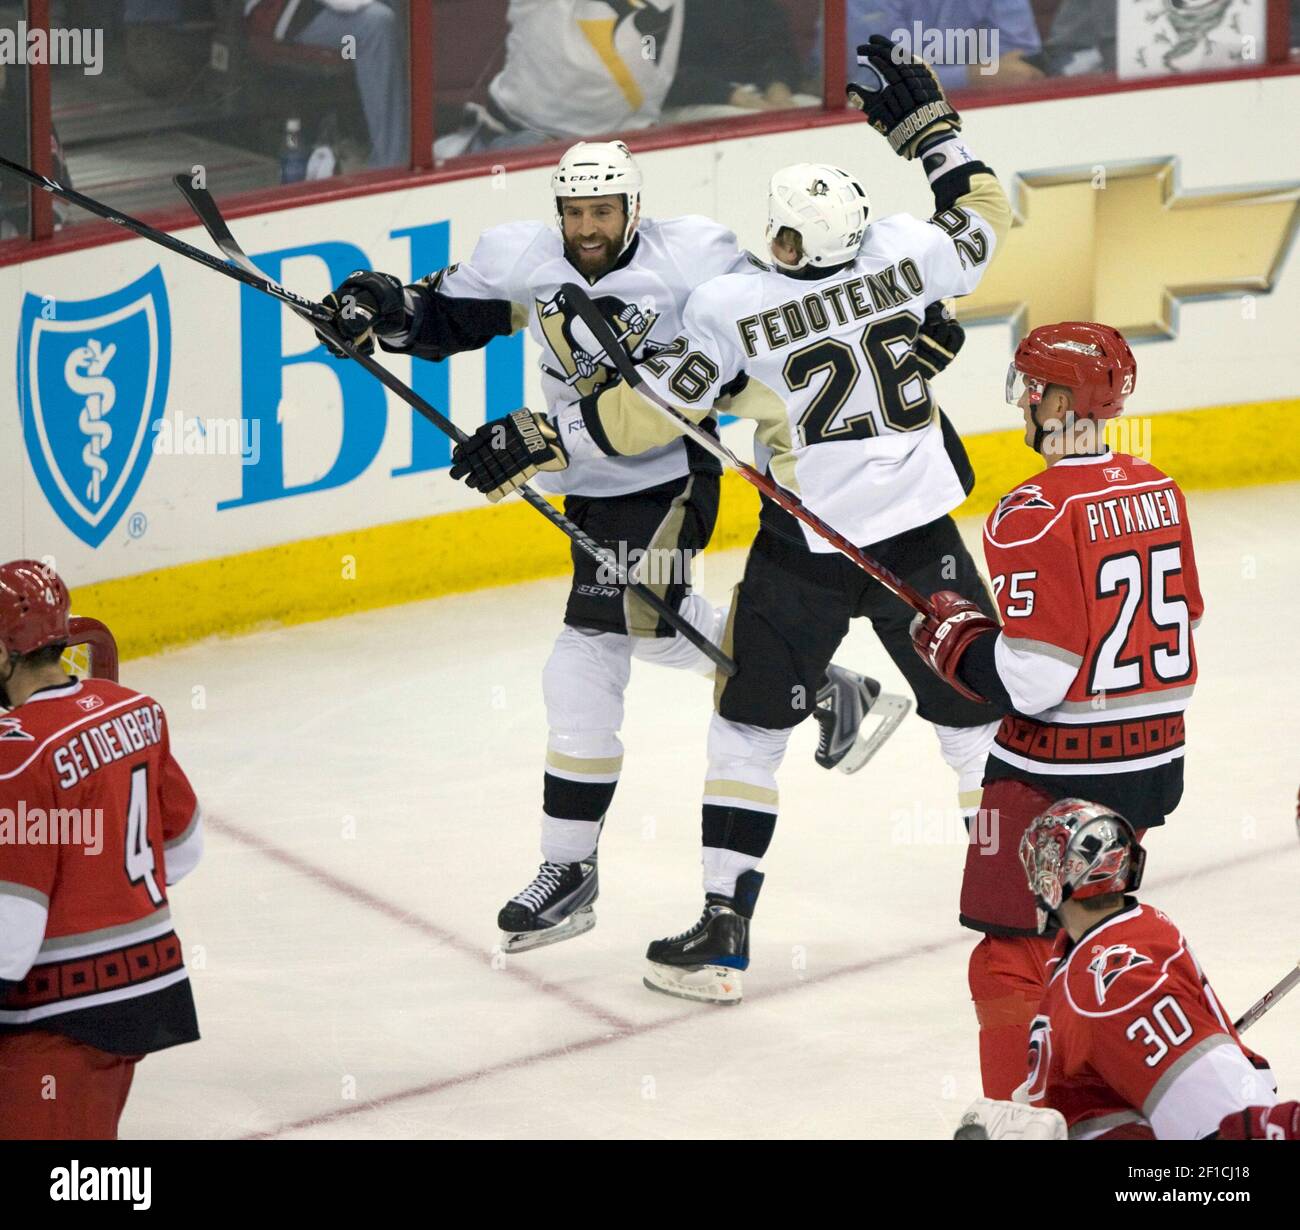 Pittsburgh Penguins' Ruslan Fedotenko (26) celebrates his first period goal  with teammate Maxime Talbot (25) in Game 4 of the NHL Eastern Conference  finals at the RBC Center in Raleigh, North Carolina